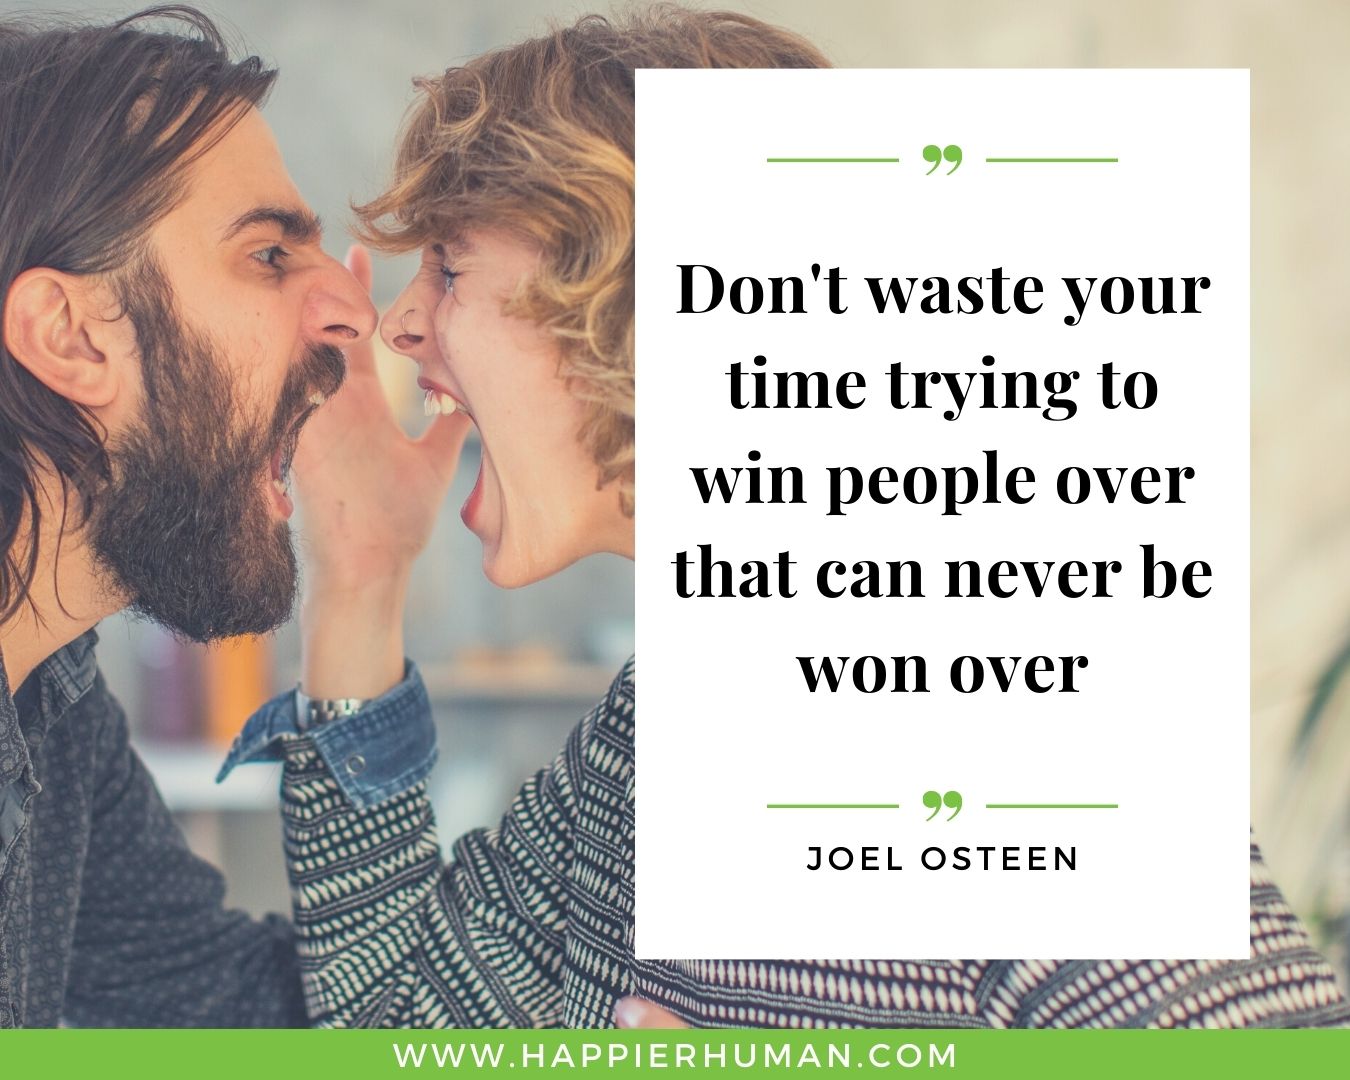 Haters Quotes - “Don't waste your time trying to win people over that can never be won over.” - Joel Osteen